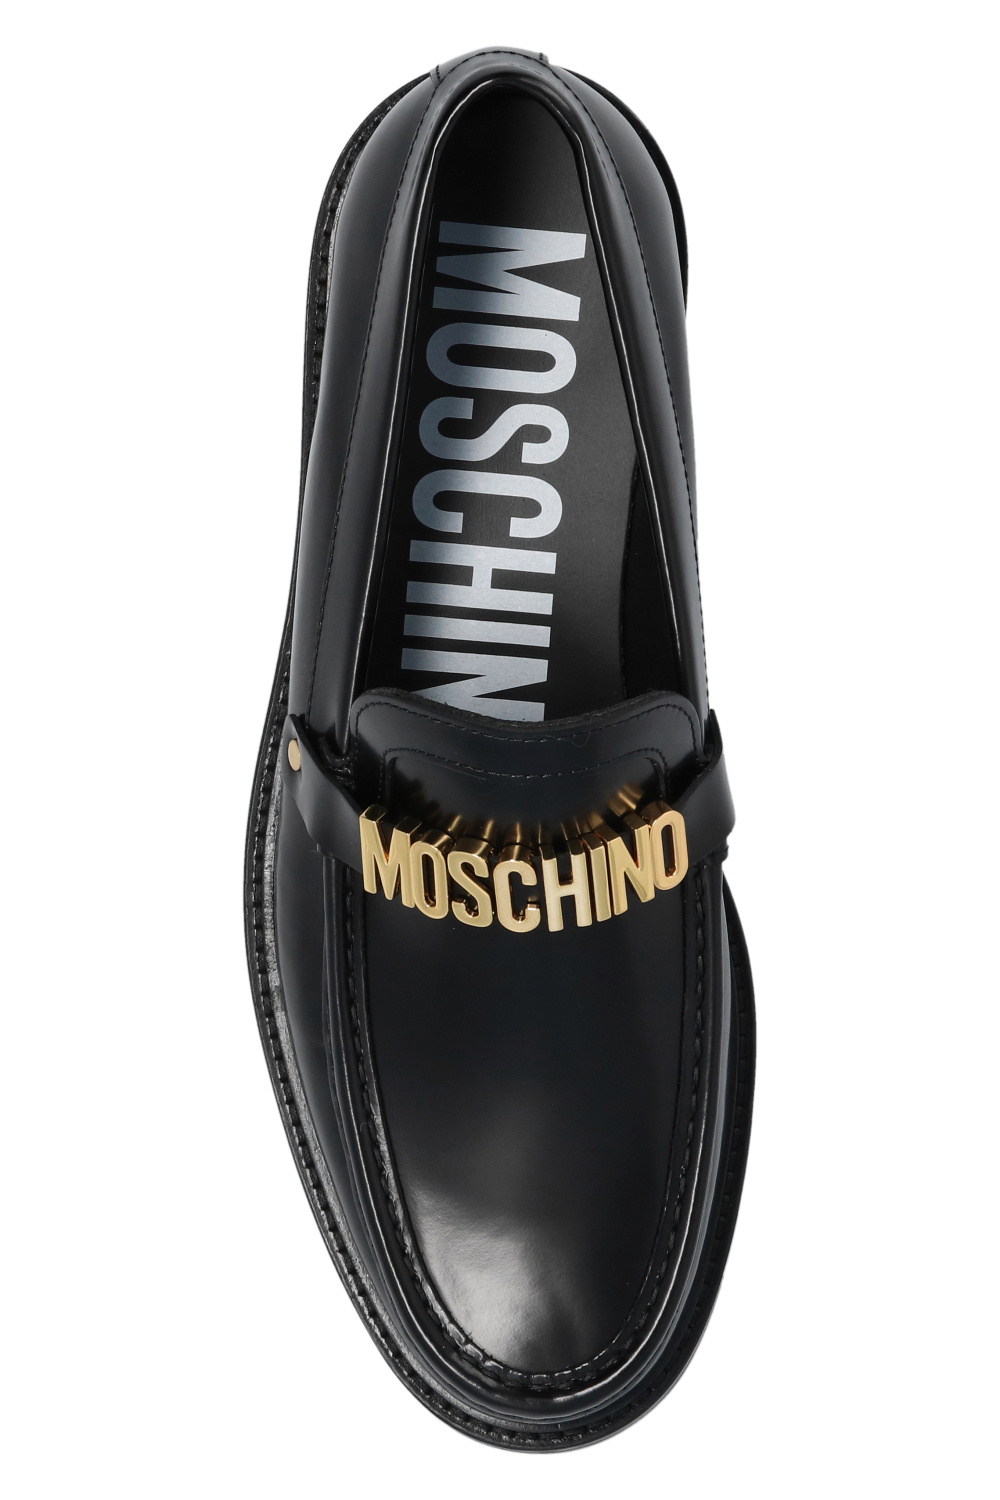 Moschino The Craziest directory shoes on the Runway at London Fashion Week Spring 2020